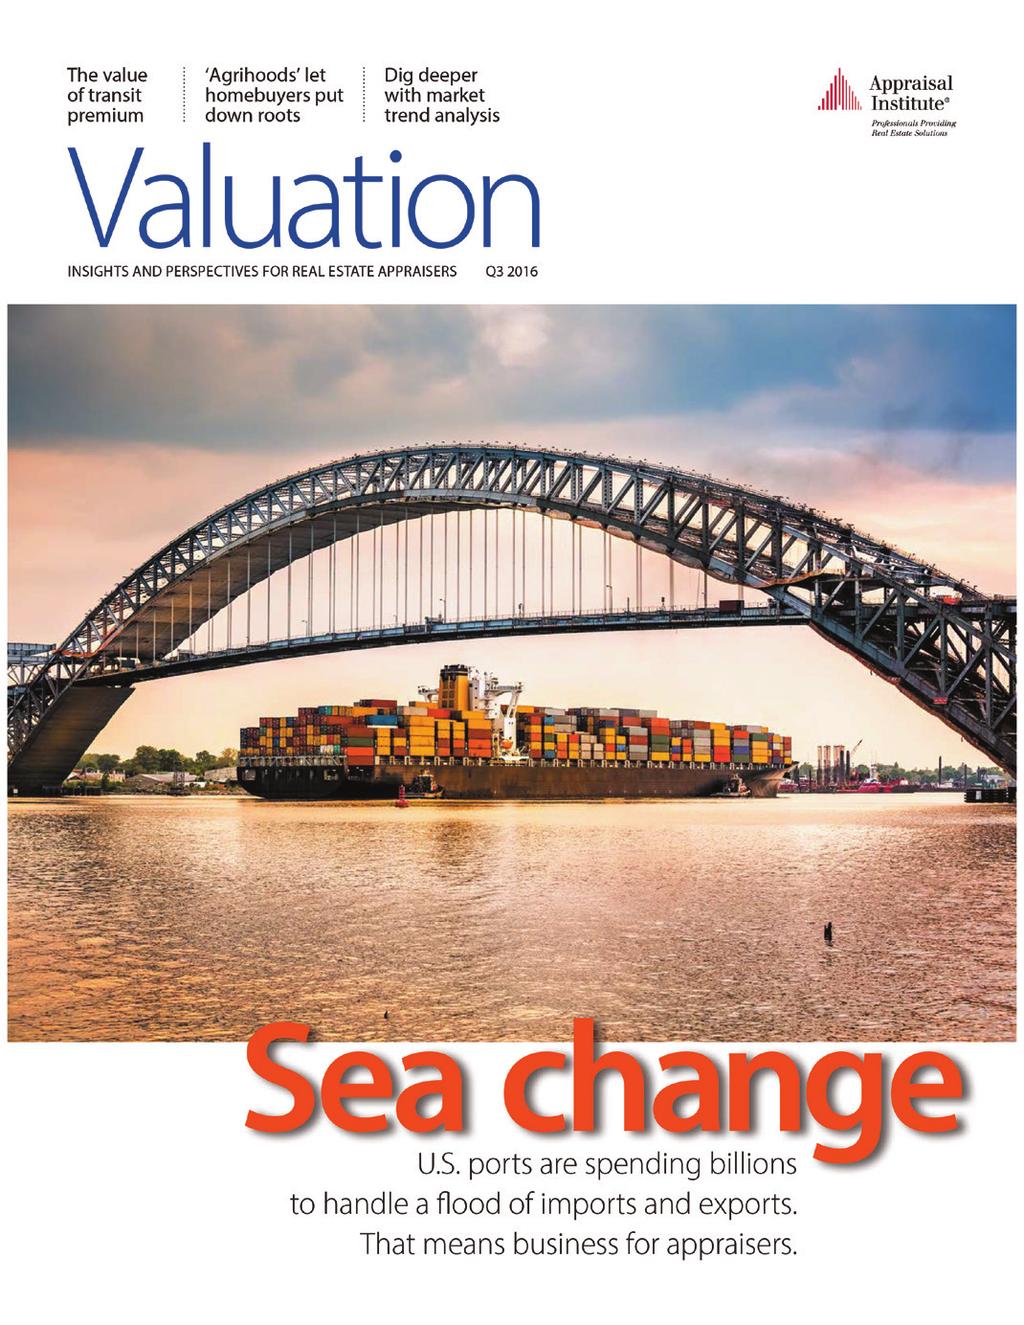 Valuation magazine Appraisal Institute s Quarterly Magazine The Appraisal Institute s quarterly magazine is mailed to about 18,000 valuation professionals.